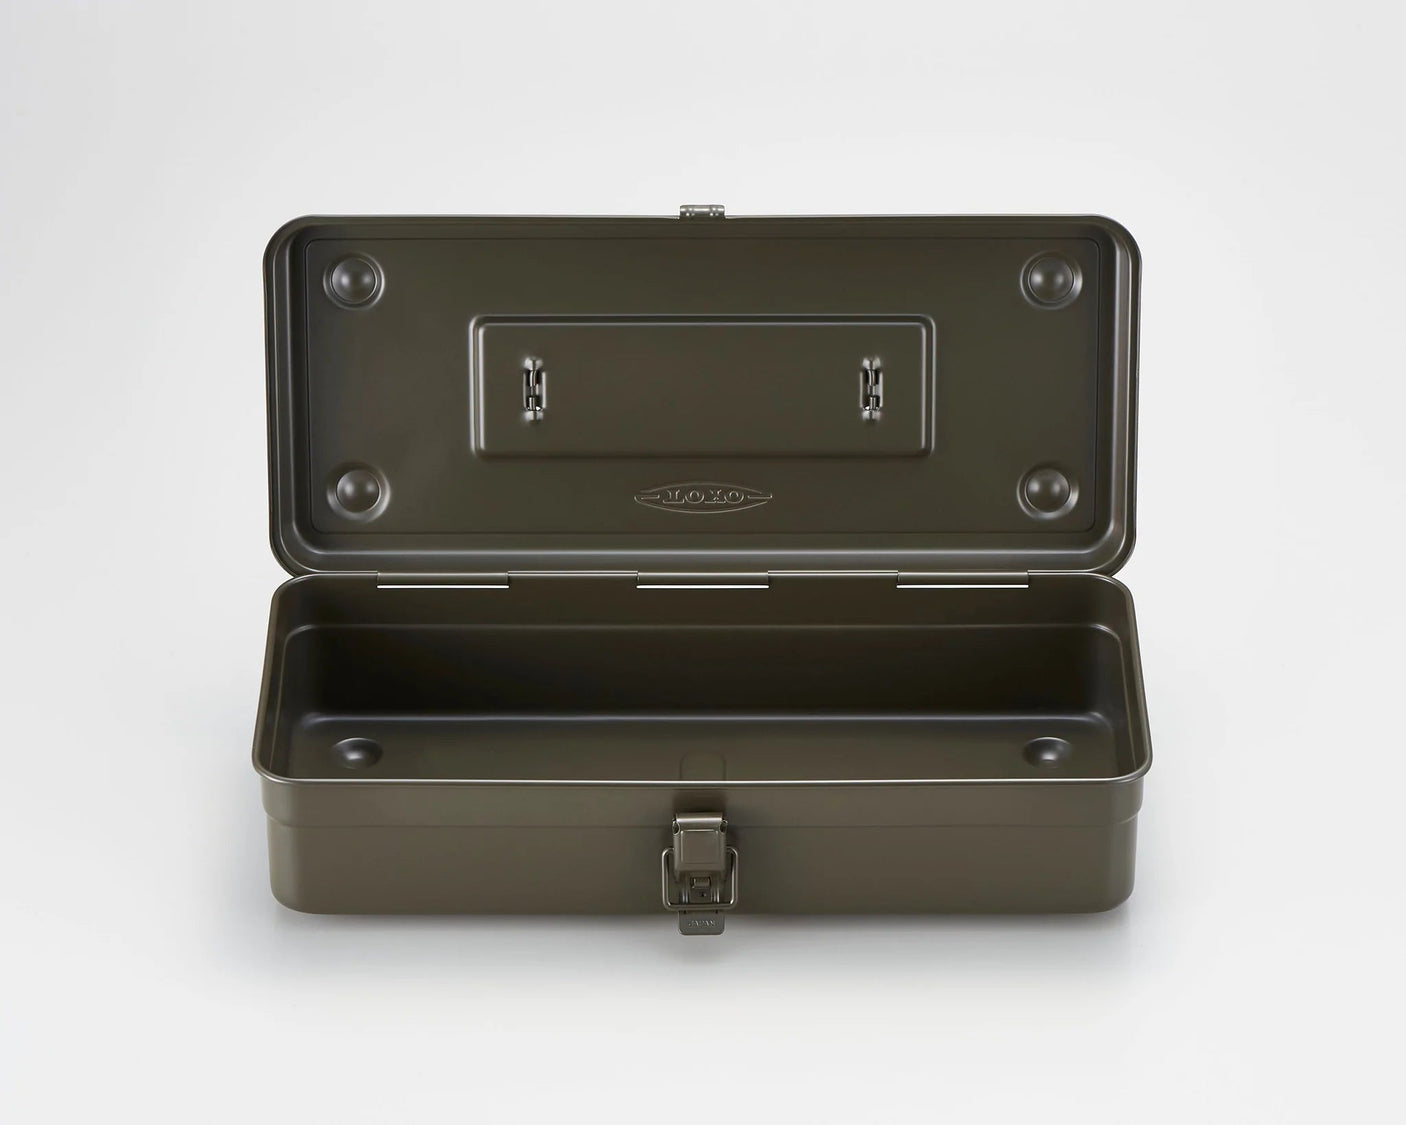 TOYO Trunk Shape Toolbox T-350 MG (Moss green) - Tool Bags Boxes and Rolls - Japanese Tools Australia